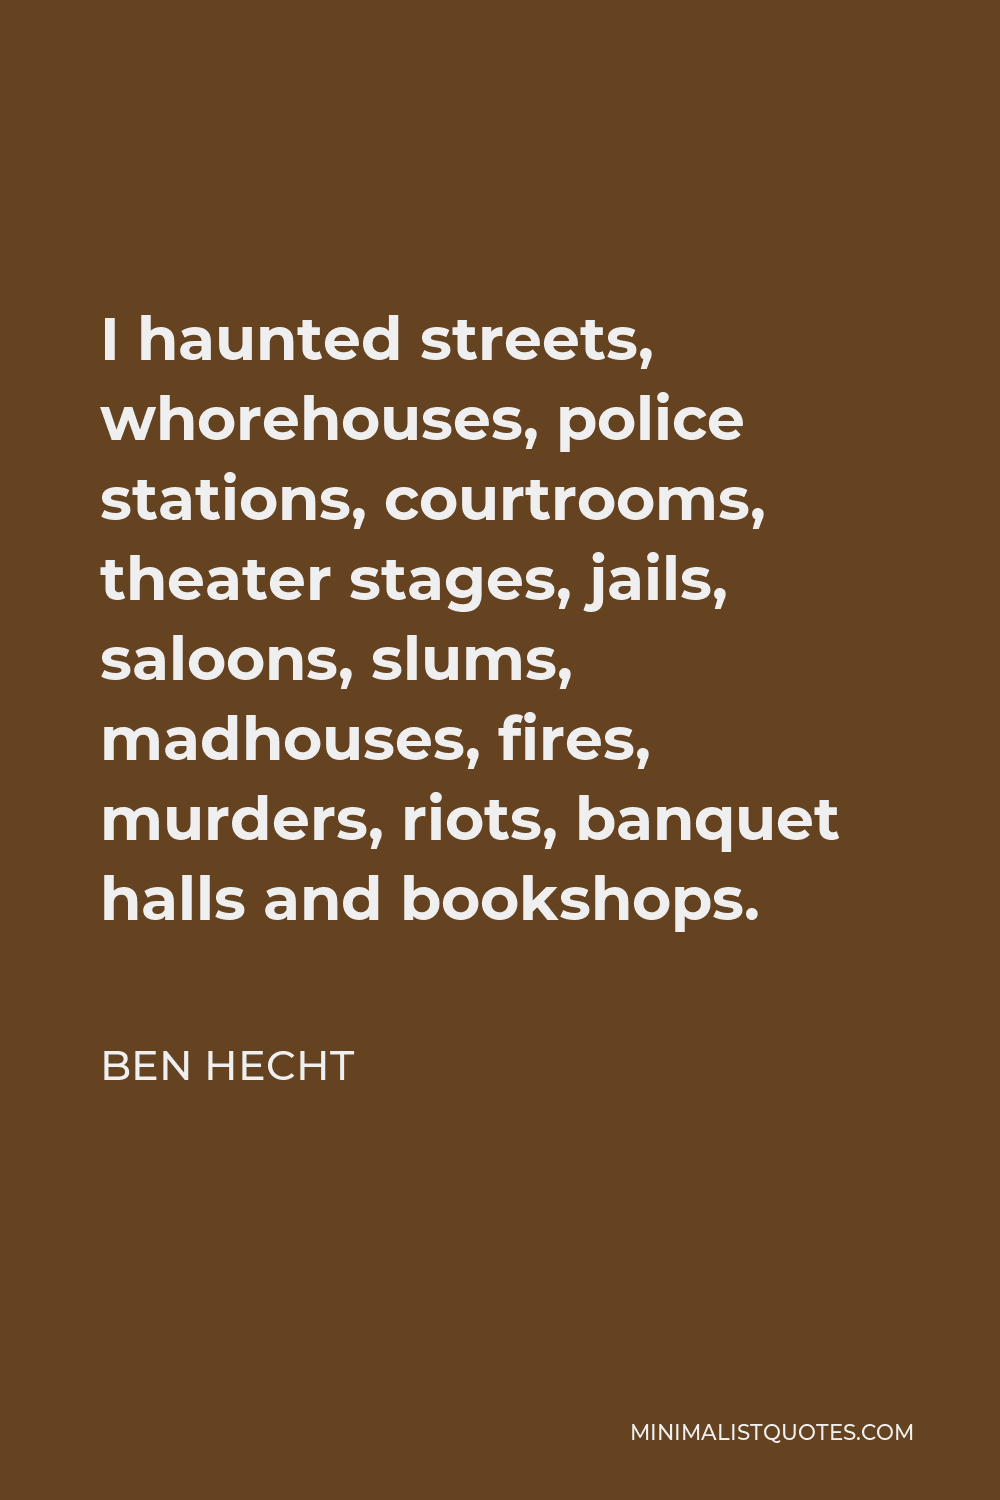 Ben Hecht Quote - I haunted streets, whorehouses, police stations, courtrooms, theater stages, jails, saloons, slums, madhouses, fires, murders, riots, banquet halls and bookshops.